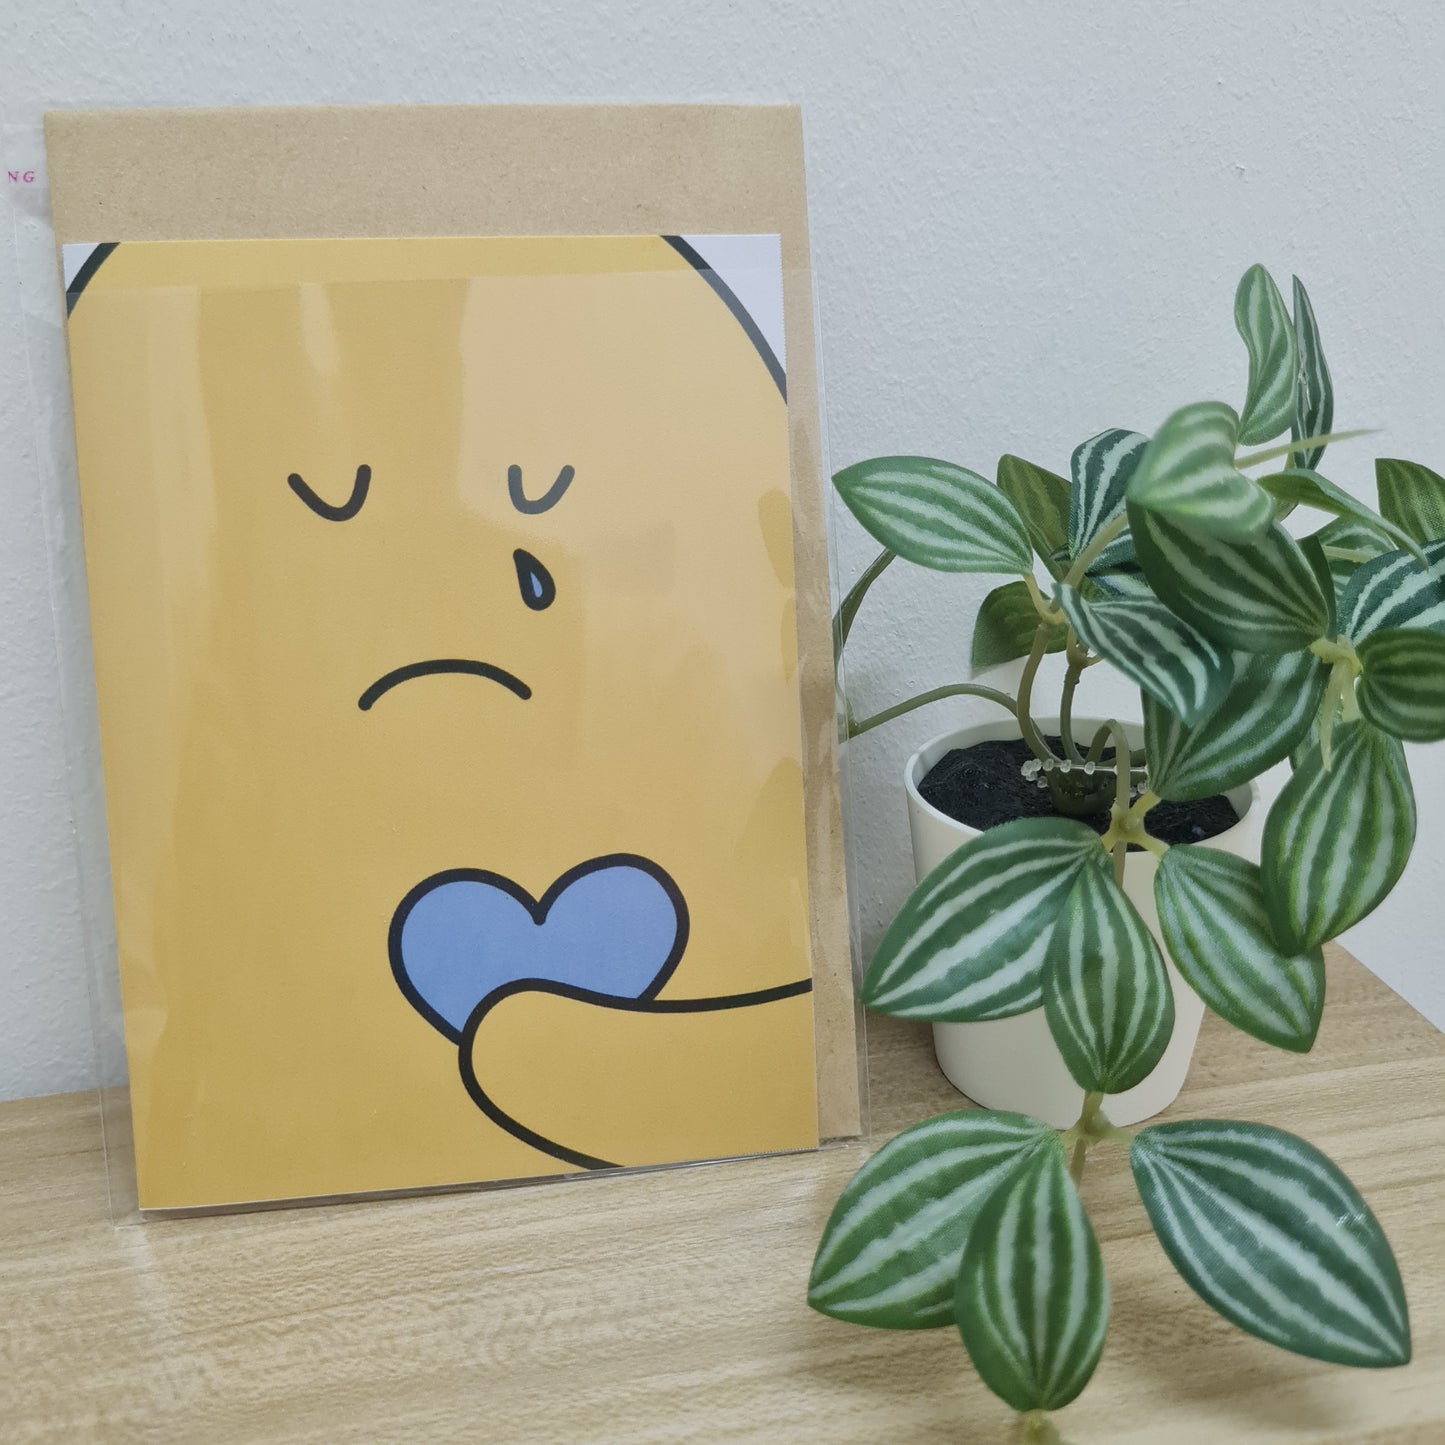 GREETING CARD - "SADLY" by KAYA TOAST FOR THE SOUL